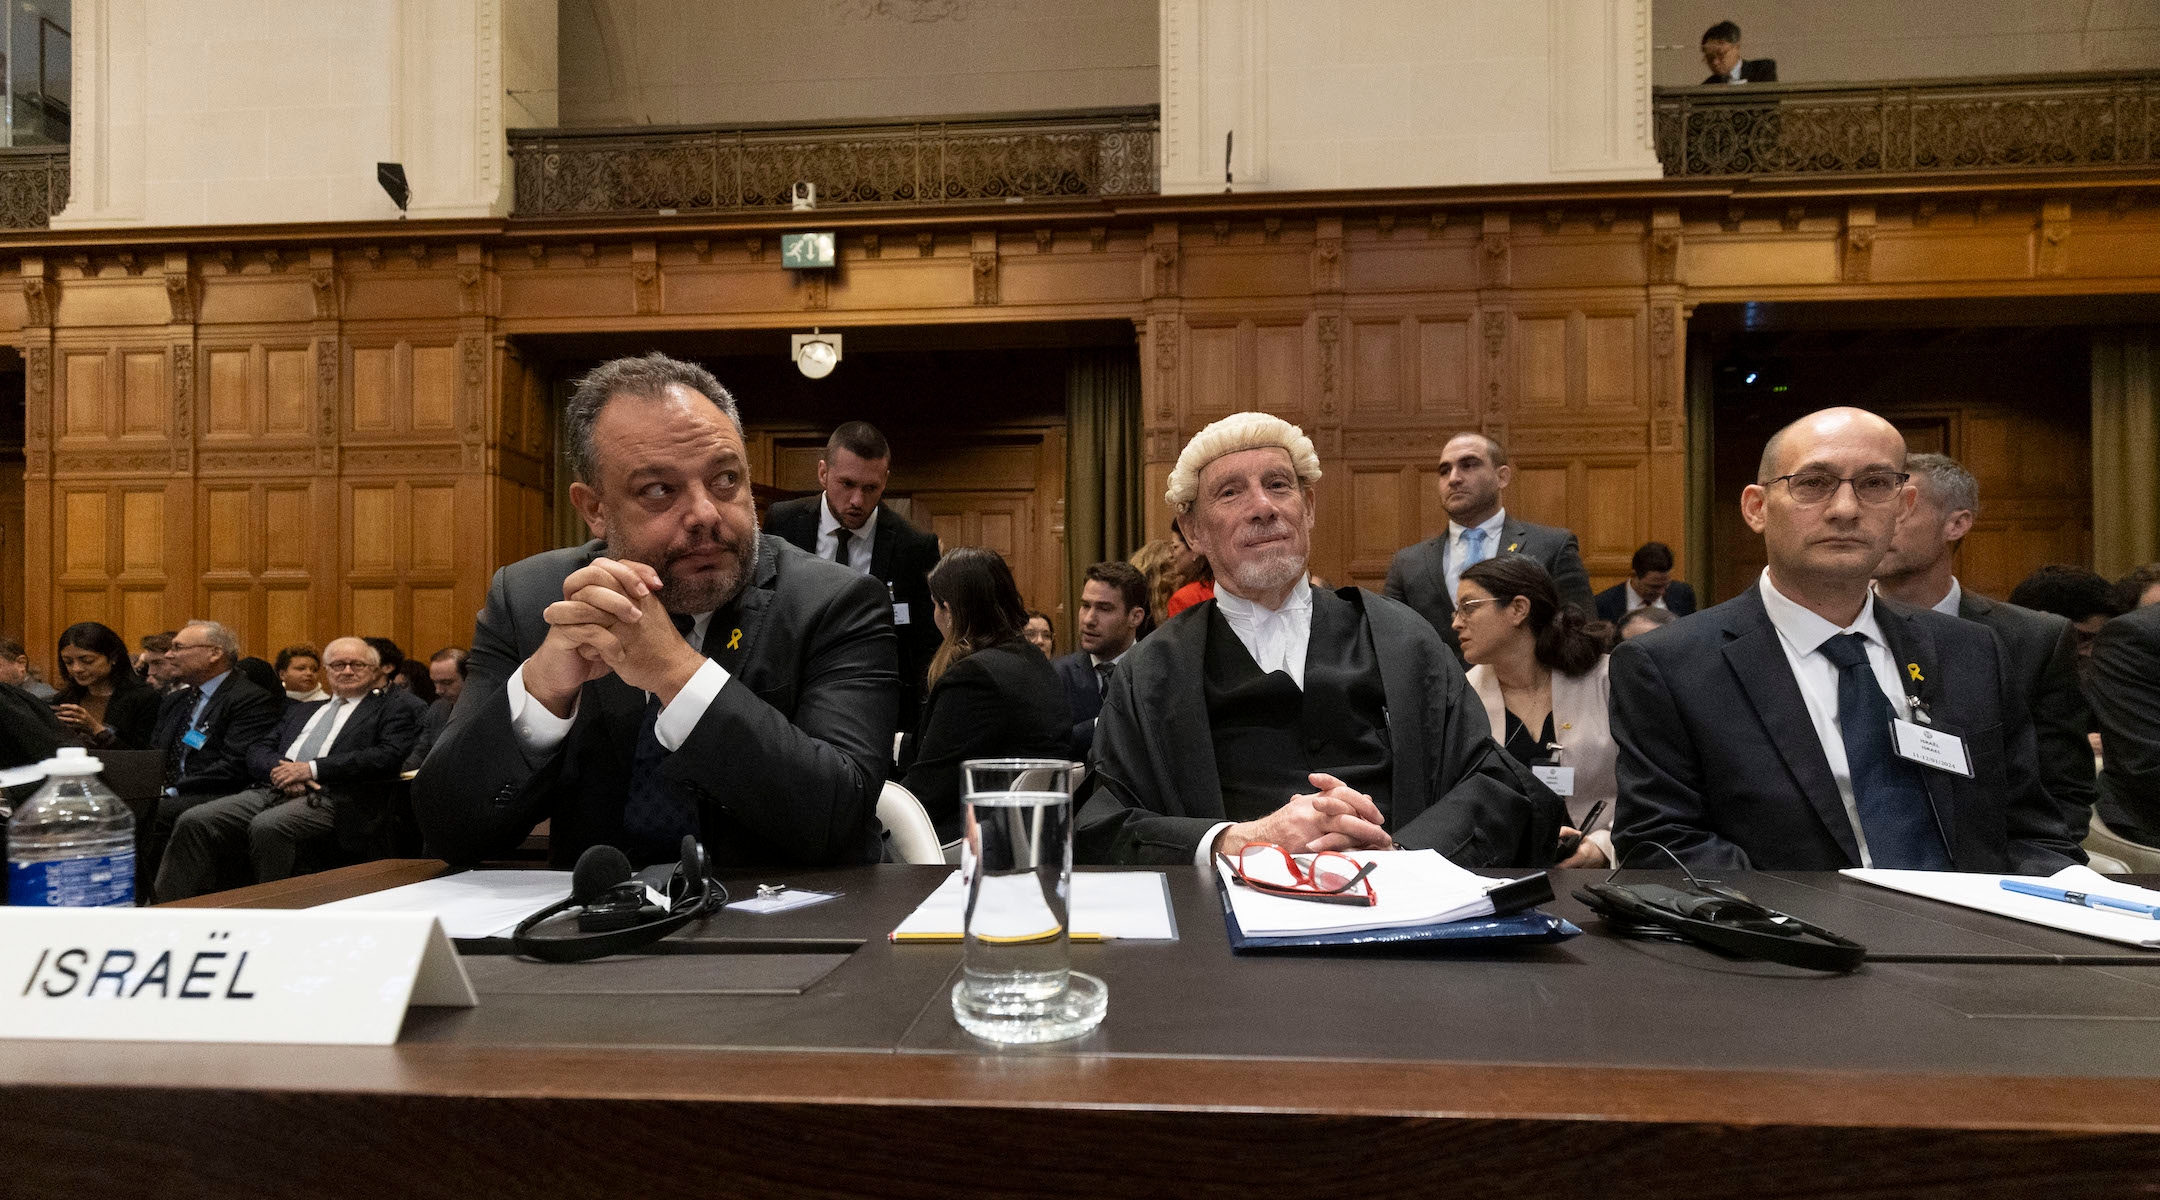 Israeli legal counsellor Tal Becker, barrister Malcolm Shaw, and Gilad Noam wait for hearings at the International Court of Justice at the Hague, Netherlands on Jan. 12, 2024. (Michel Porro/Getty Images)